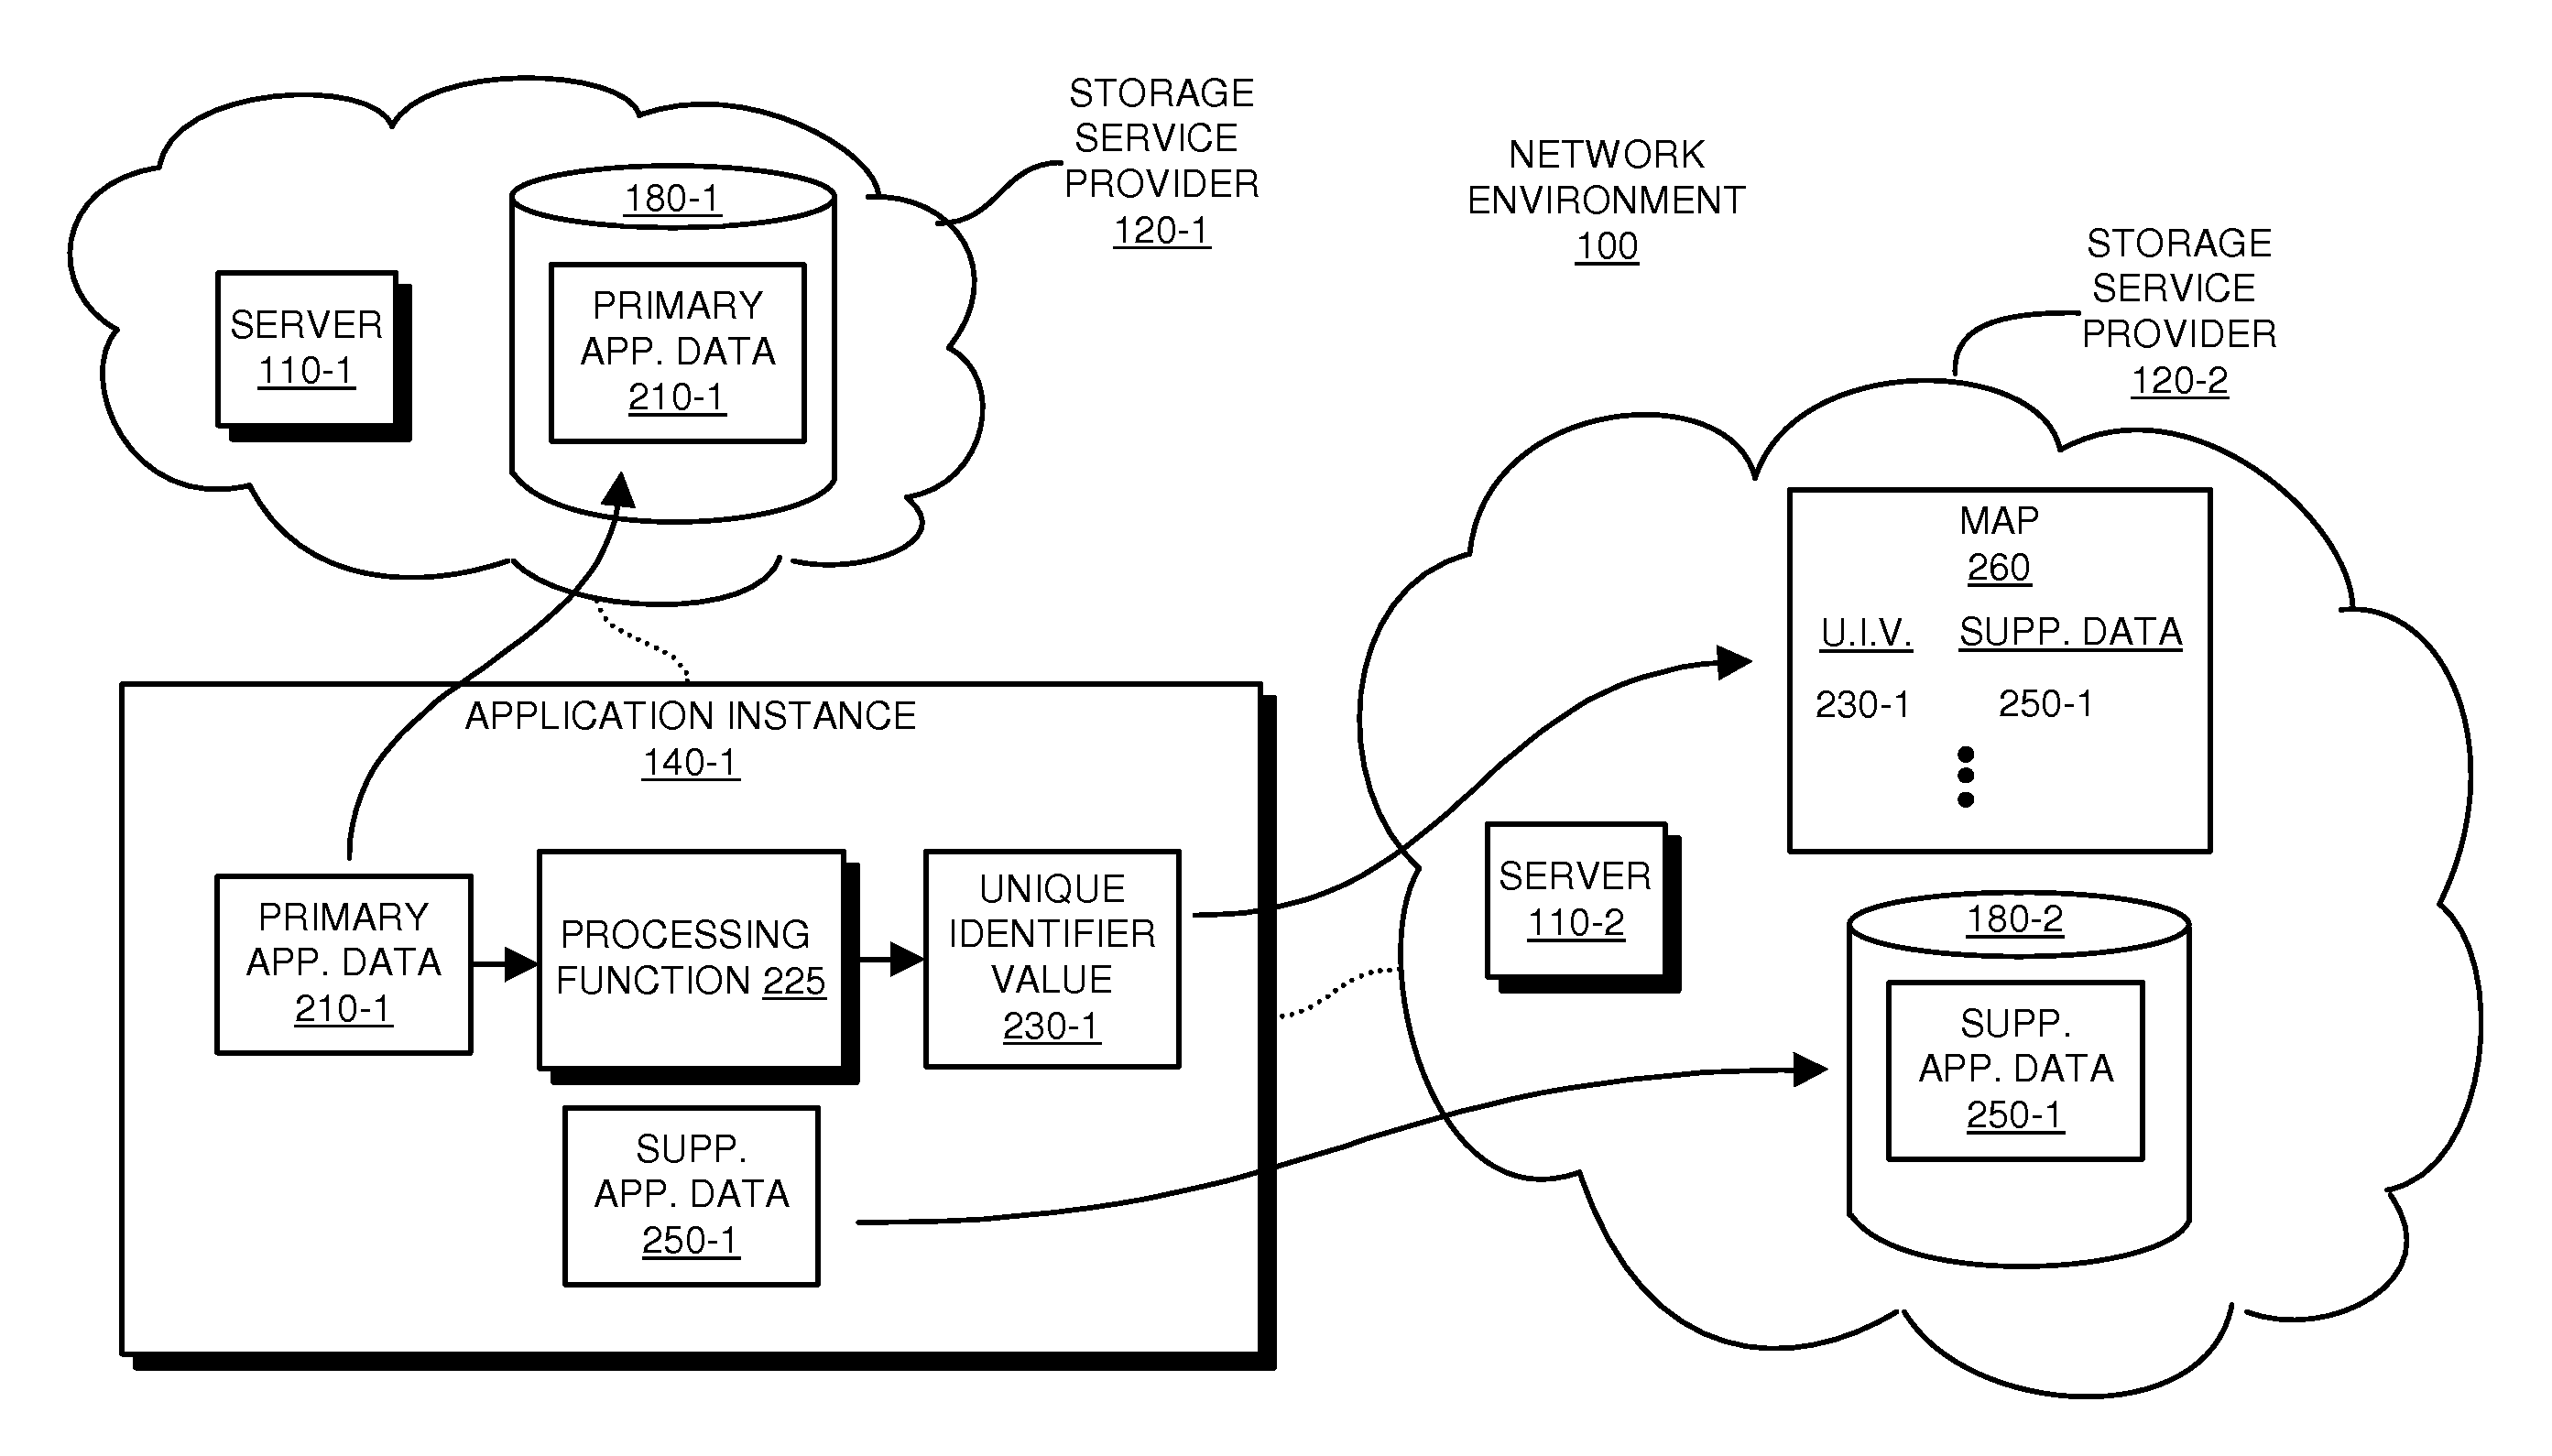 Access to supplemental data based on identifier derived from corresponding primary application data